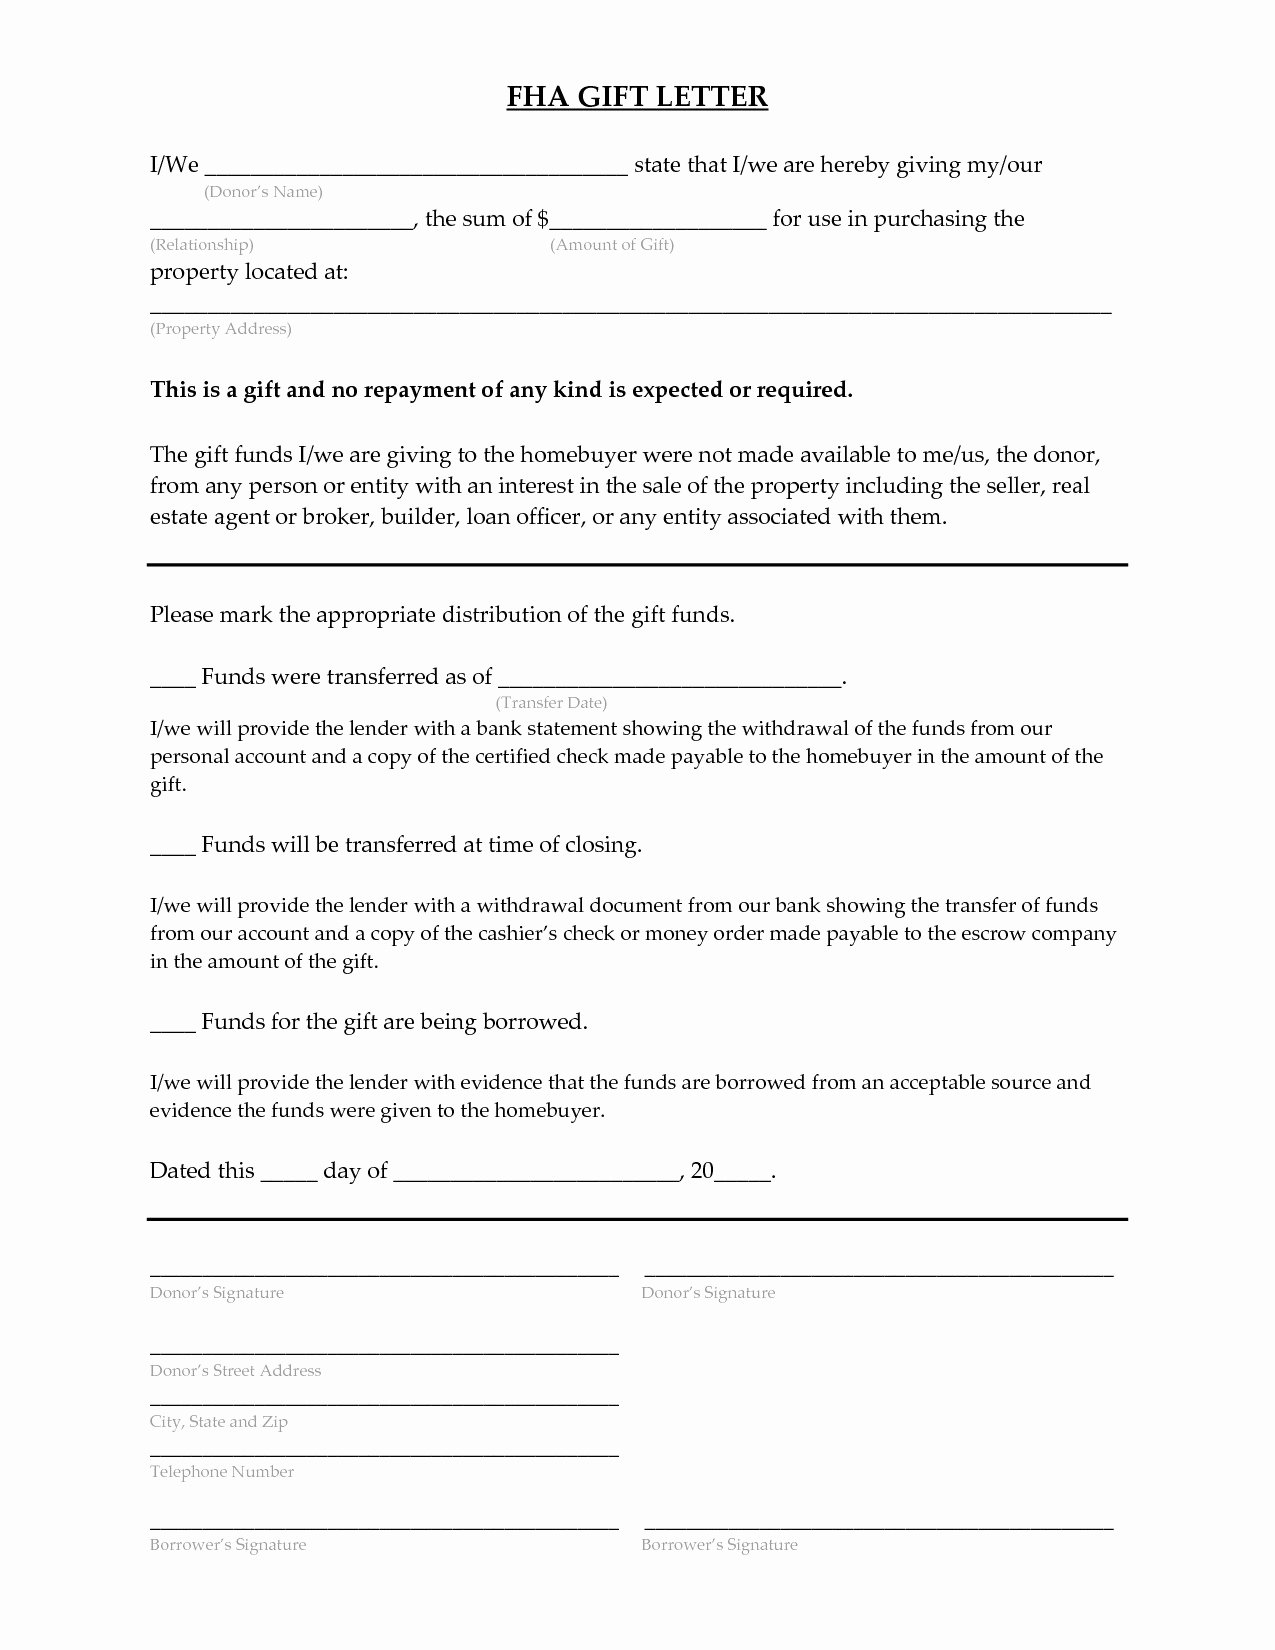 Fha Gift Letter Template Unique Fha Gift Letter Template Examples